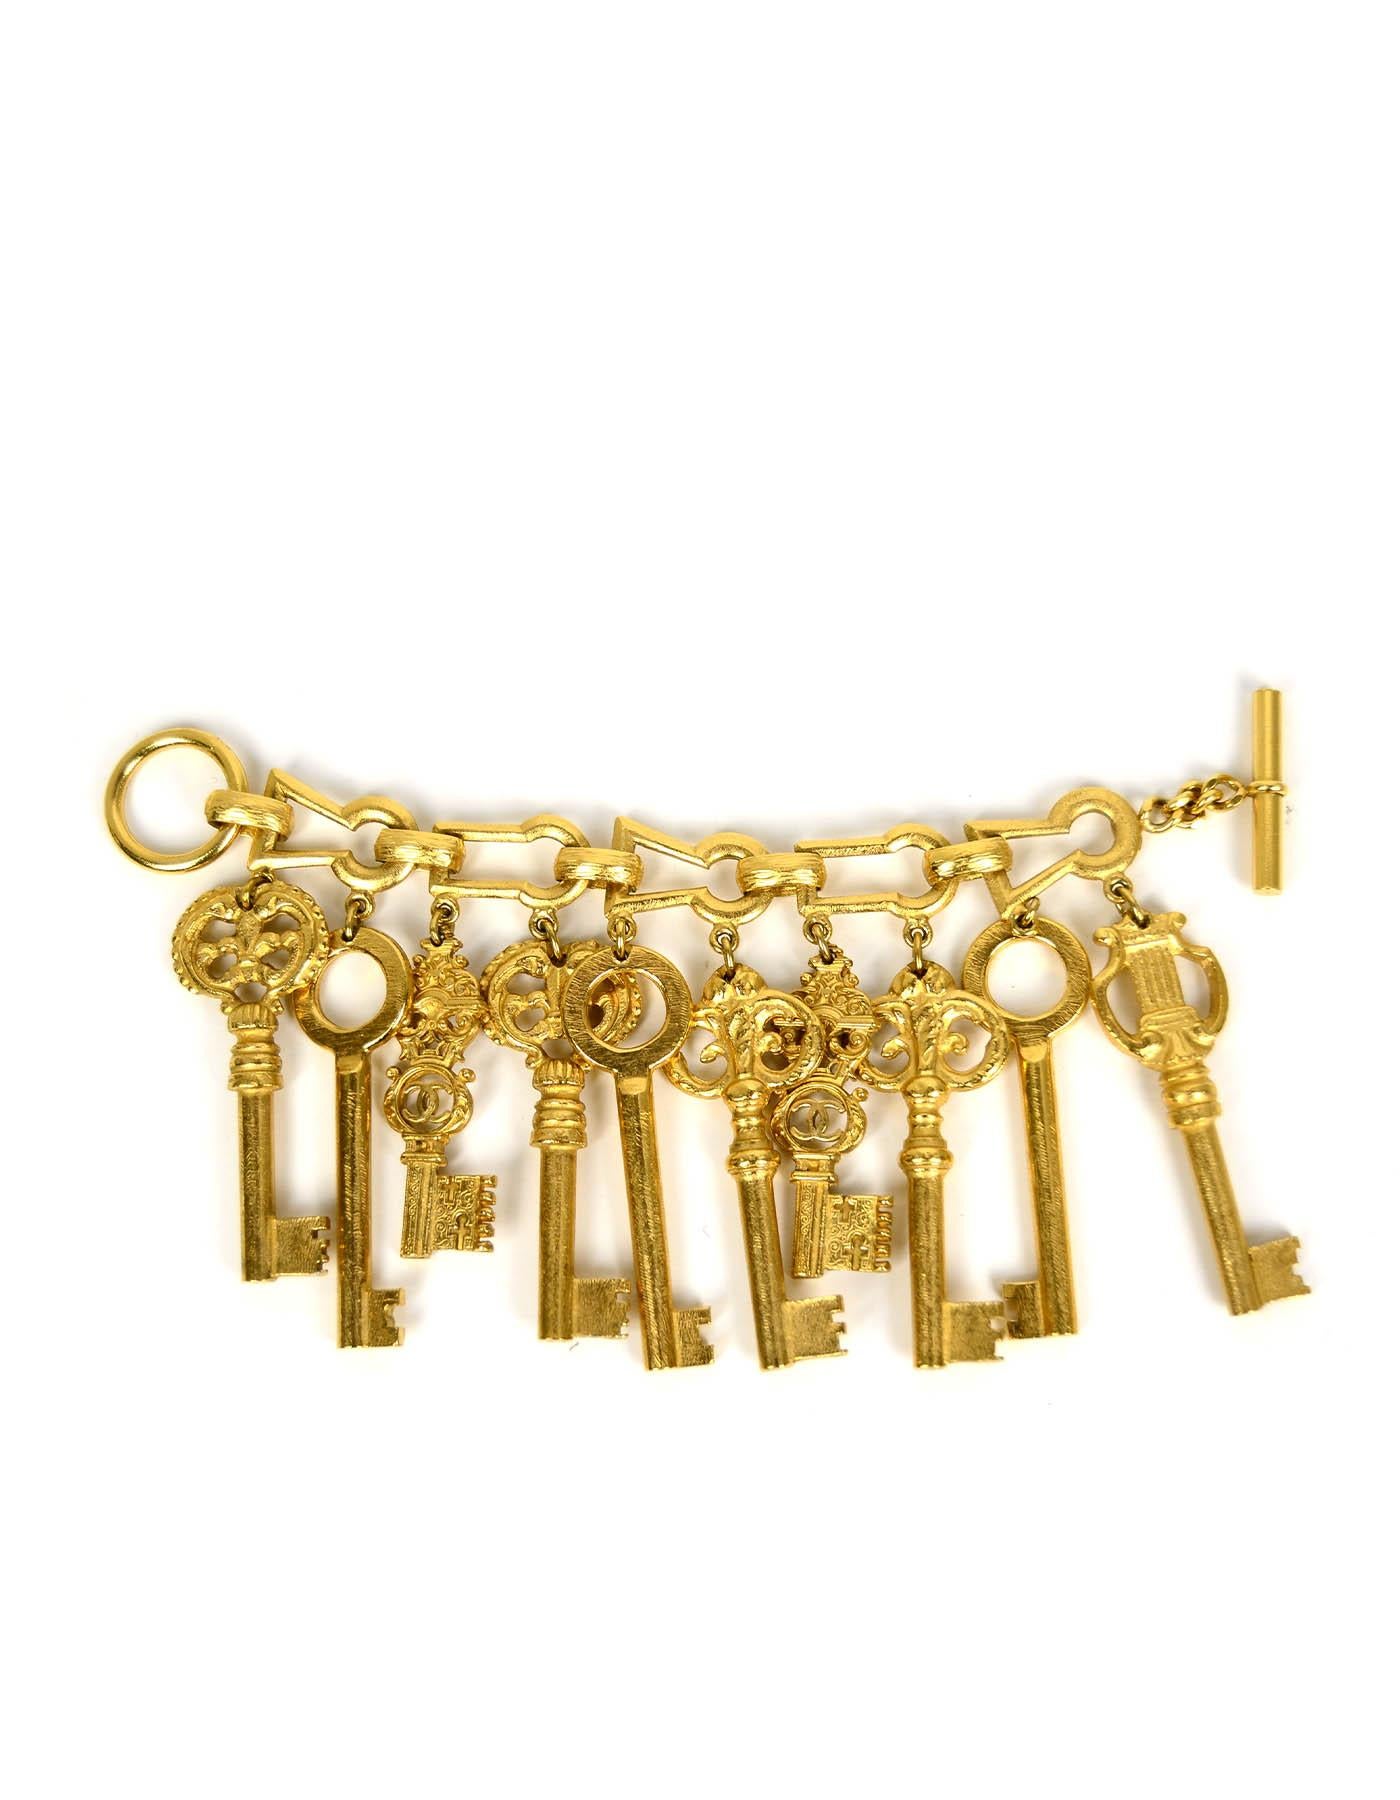 Chanel RARE COLLECTOR'S 1993 Iconic Vintage Gold CC Key Charm Bracelet In Excellent Condition In New York, NY